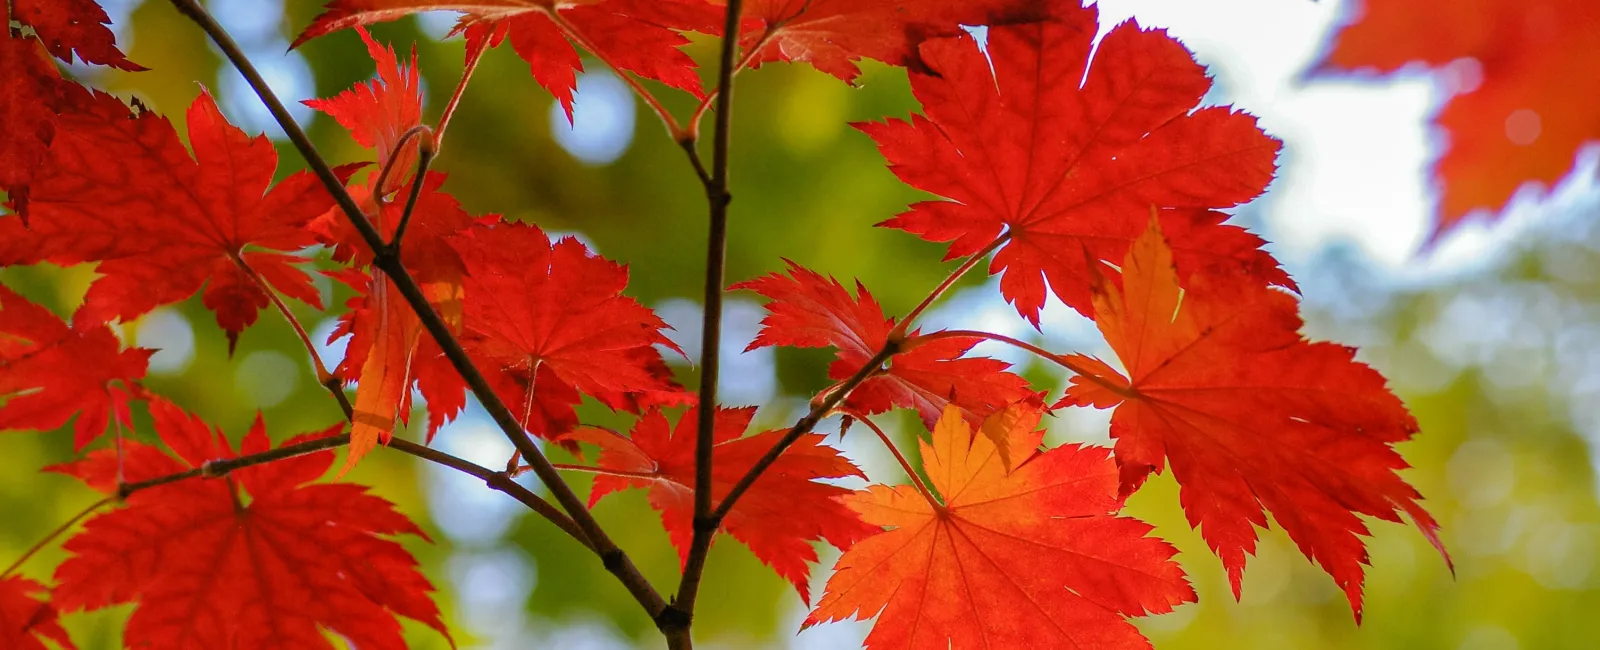 Featured image for “How To Care for a Red Maple”